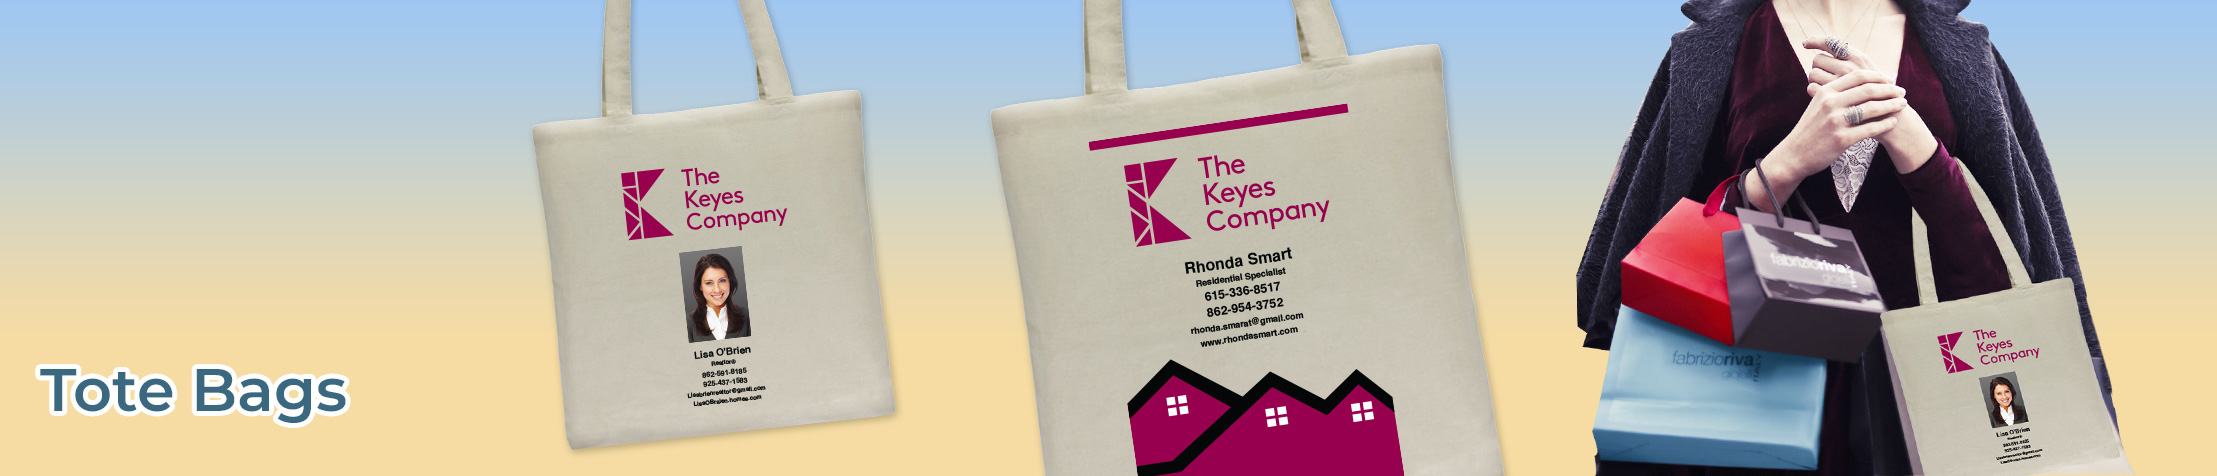 The Keyes Company Real Estate Tote Bags - The Keyes Company  personalized realtor promotional products | BestPrintBuy.com